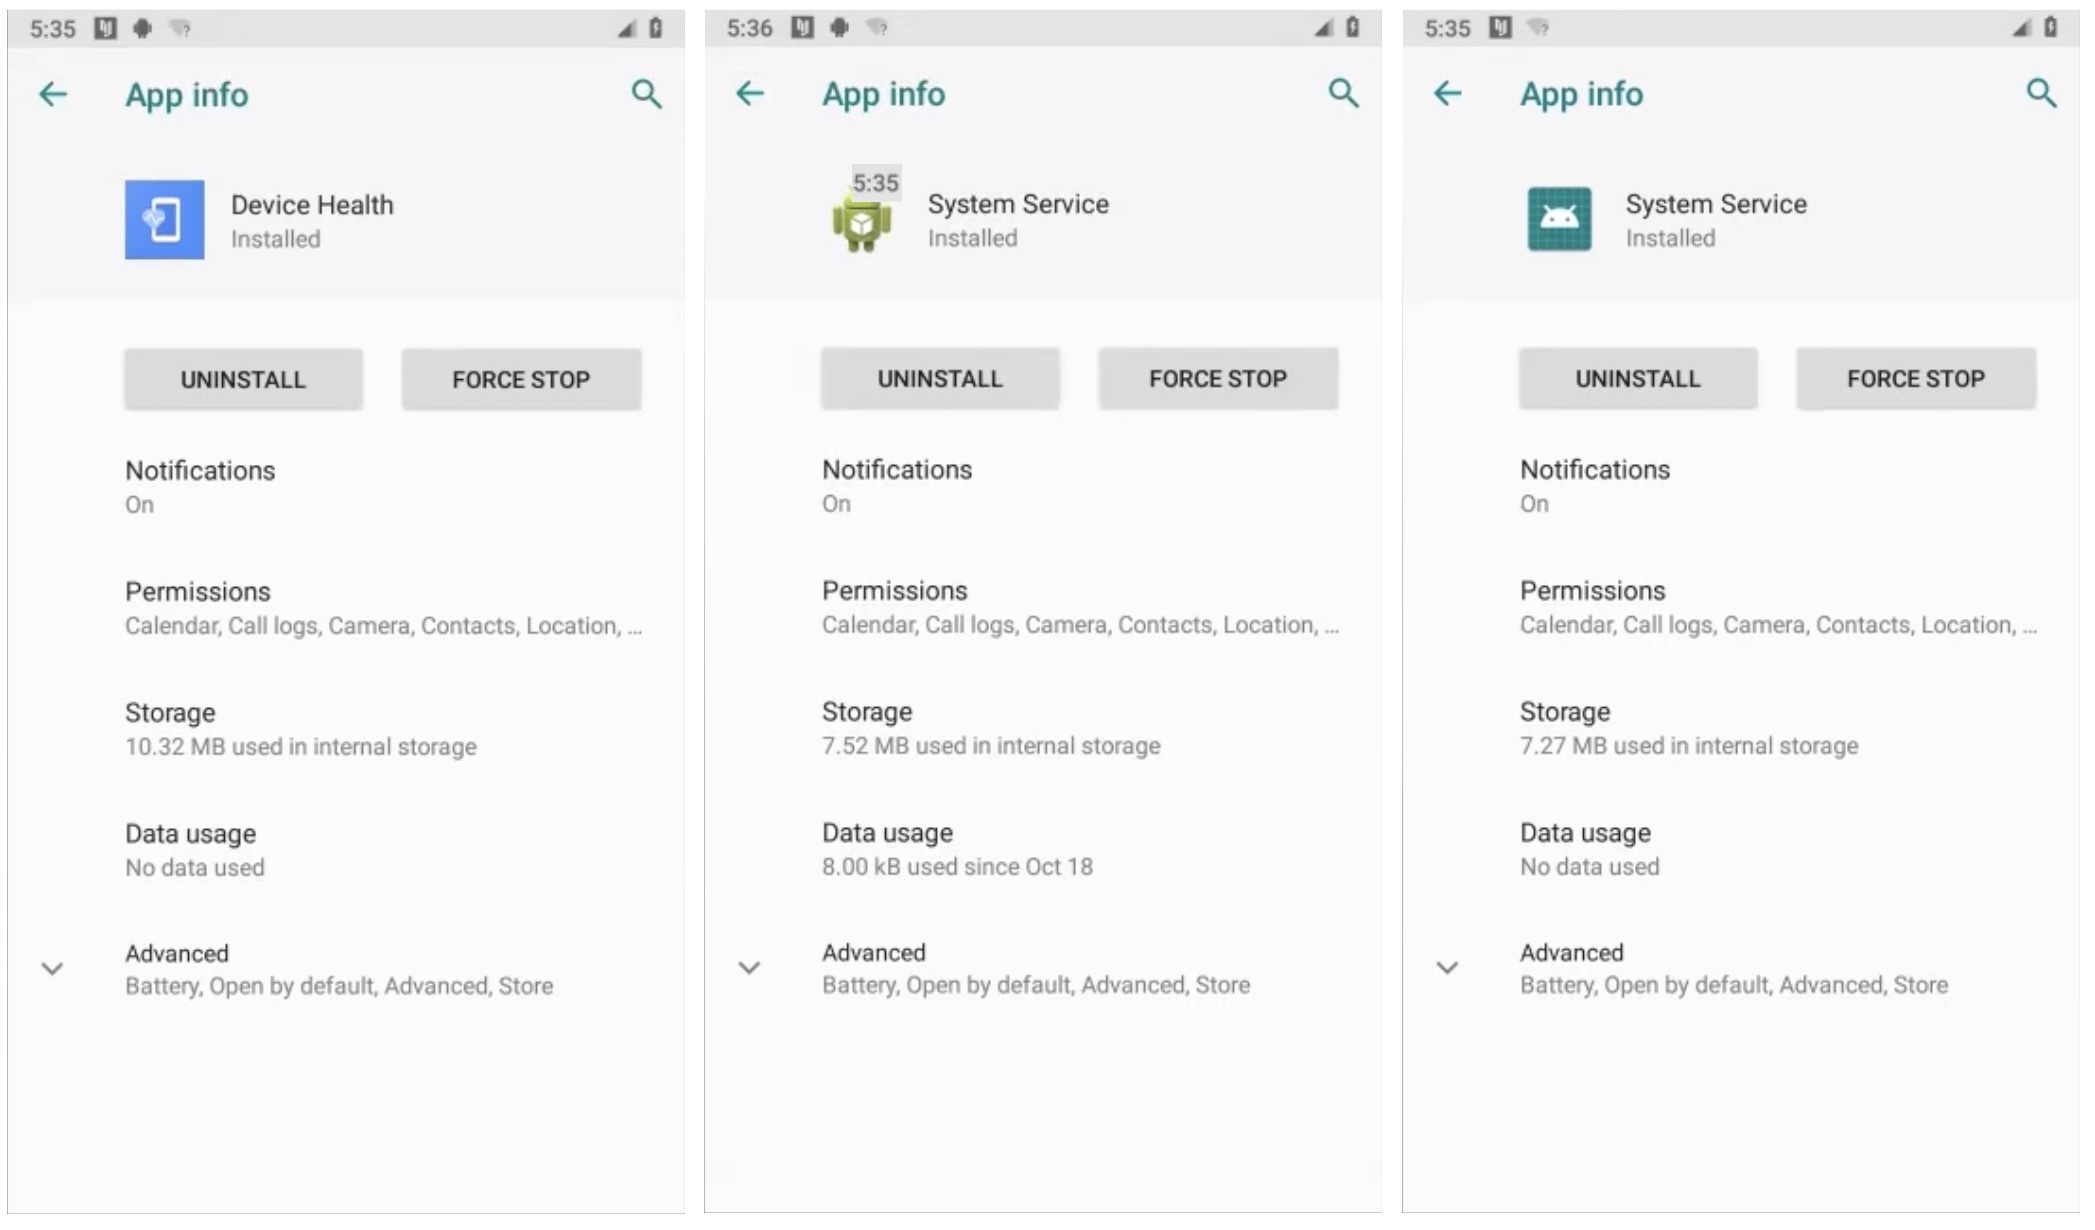 Three screenshots of spyware apps, named "Device Health" and "System Service."